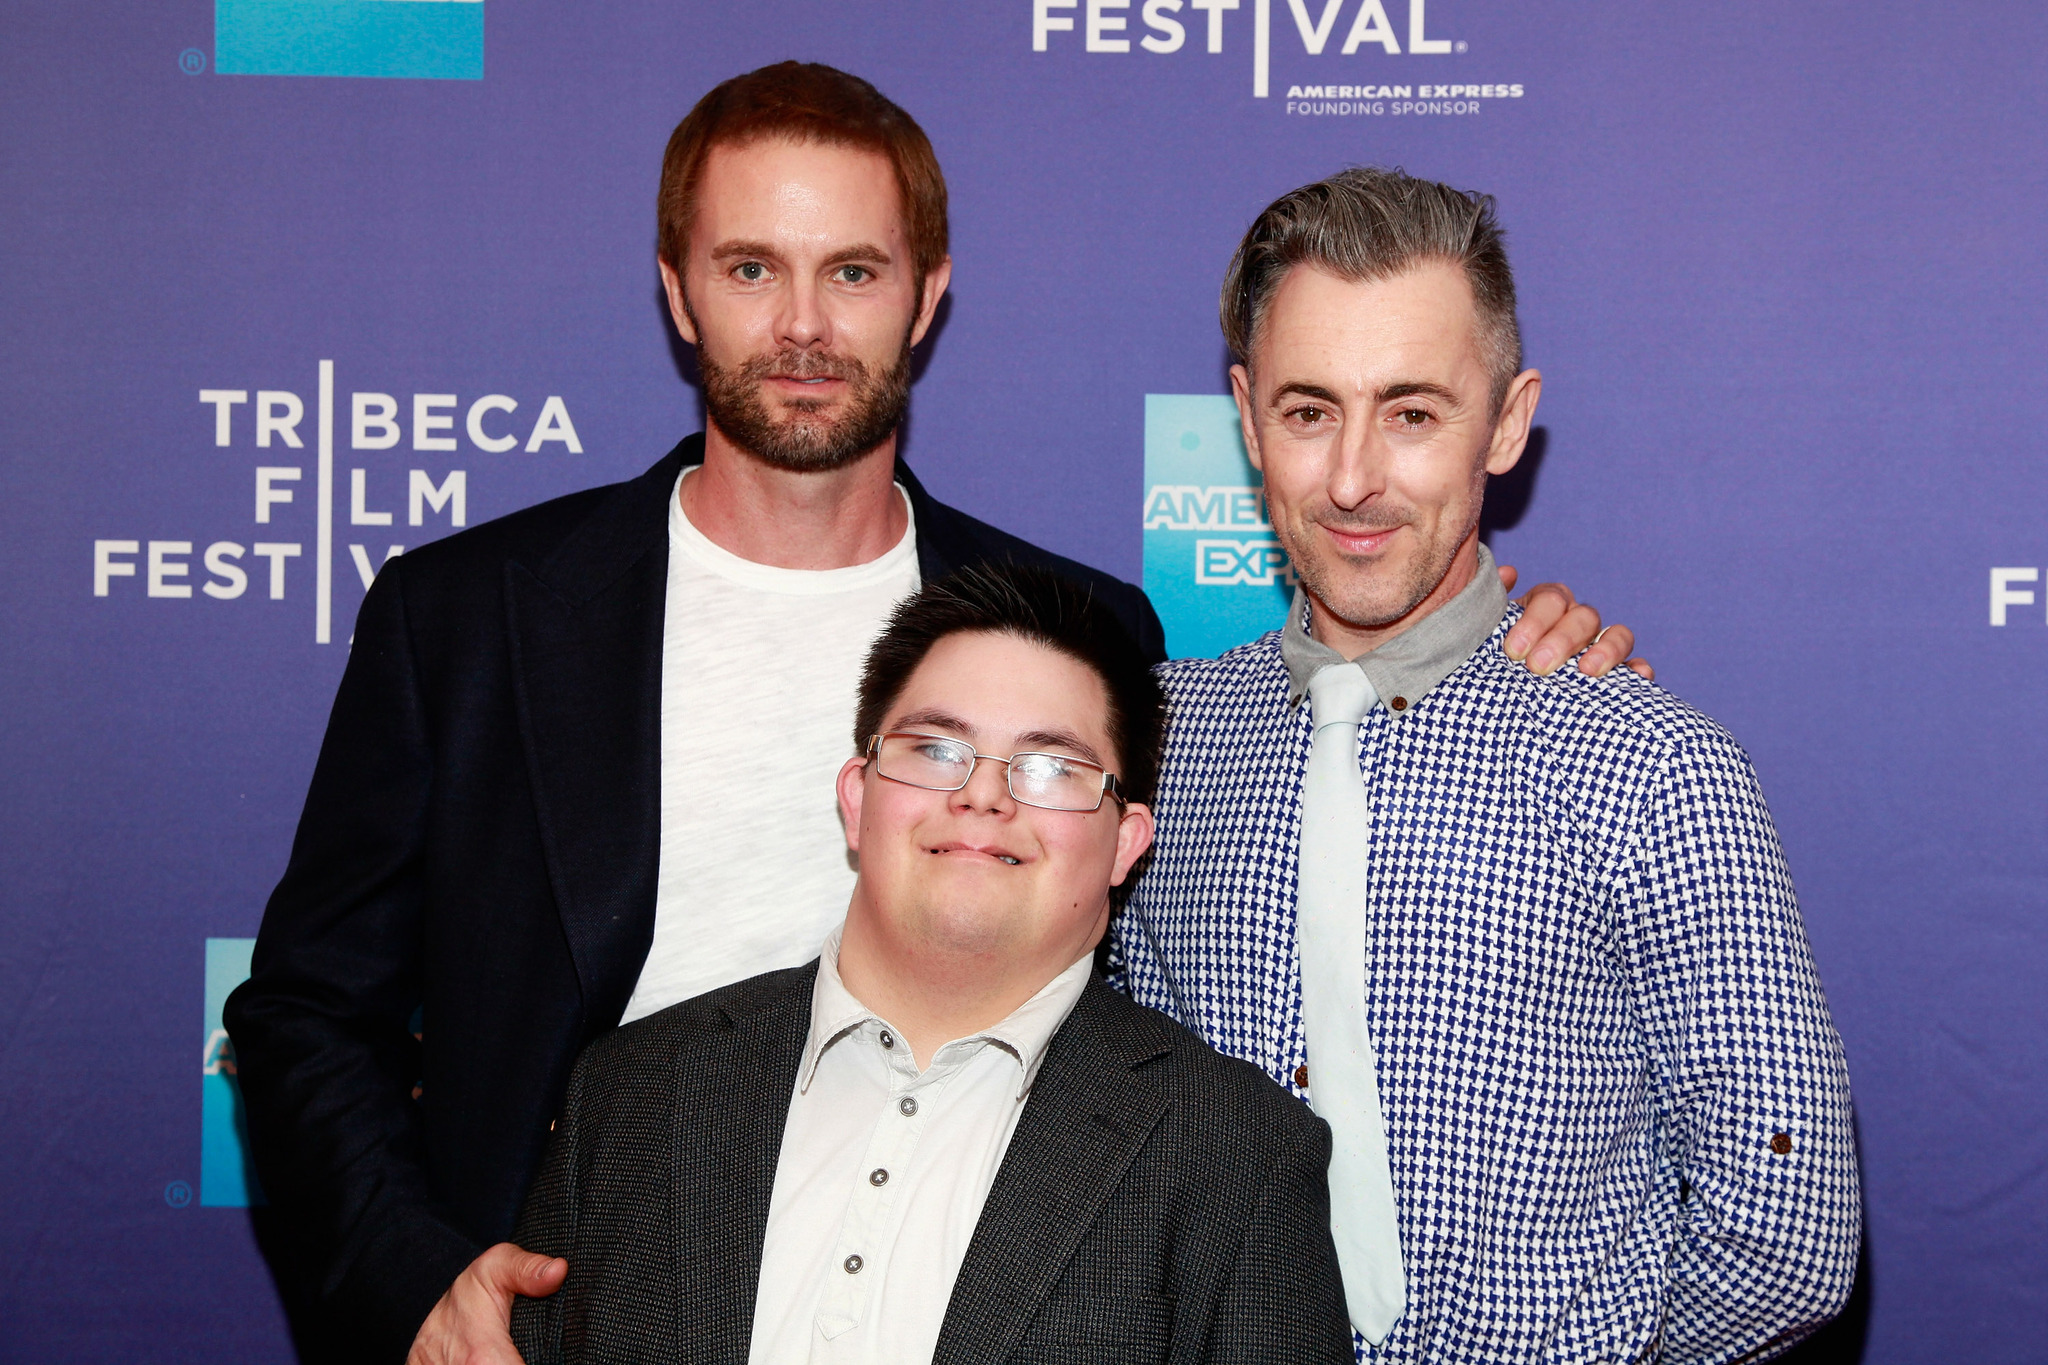 Alan Cumming, Garret Dillahunt and Isaac Leyva at event of Any Day Now (2012)